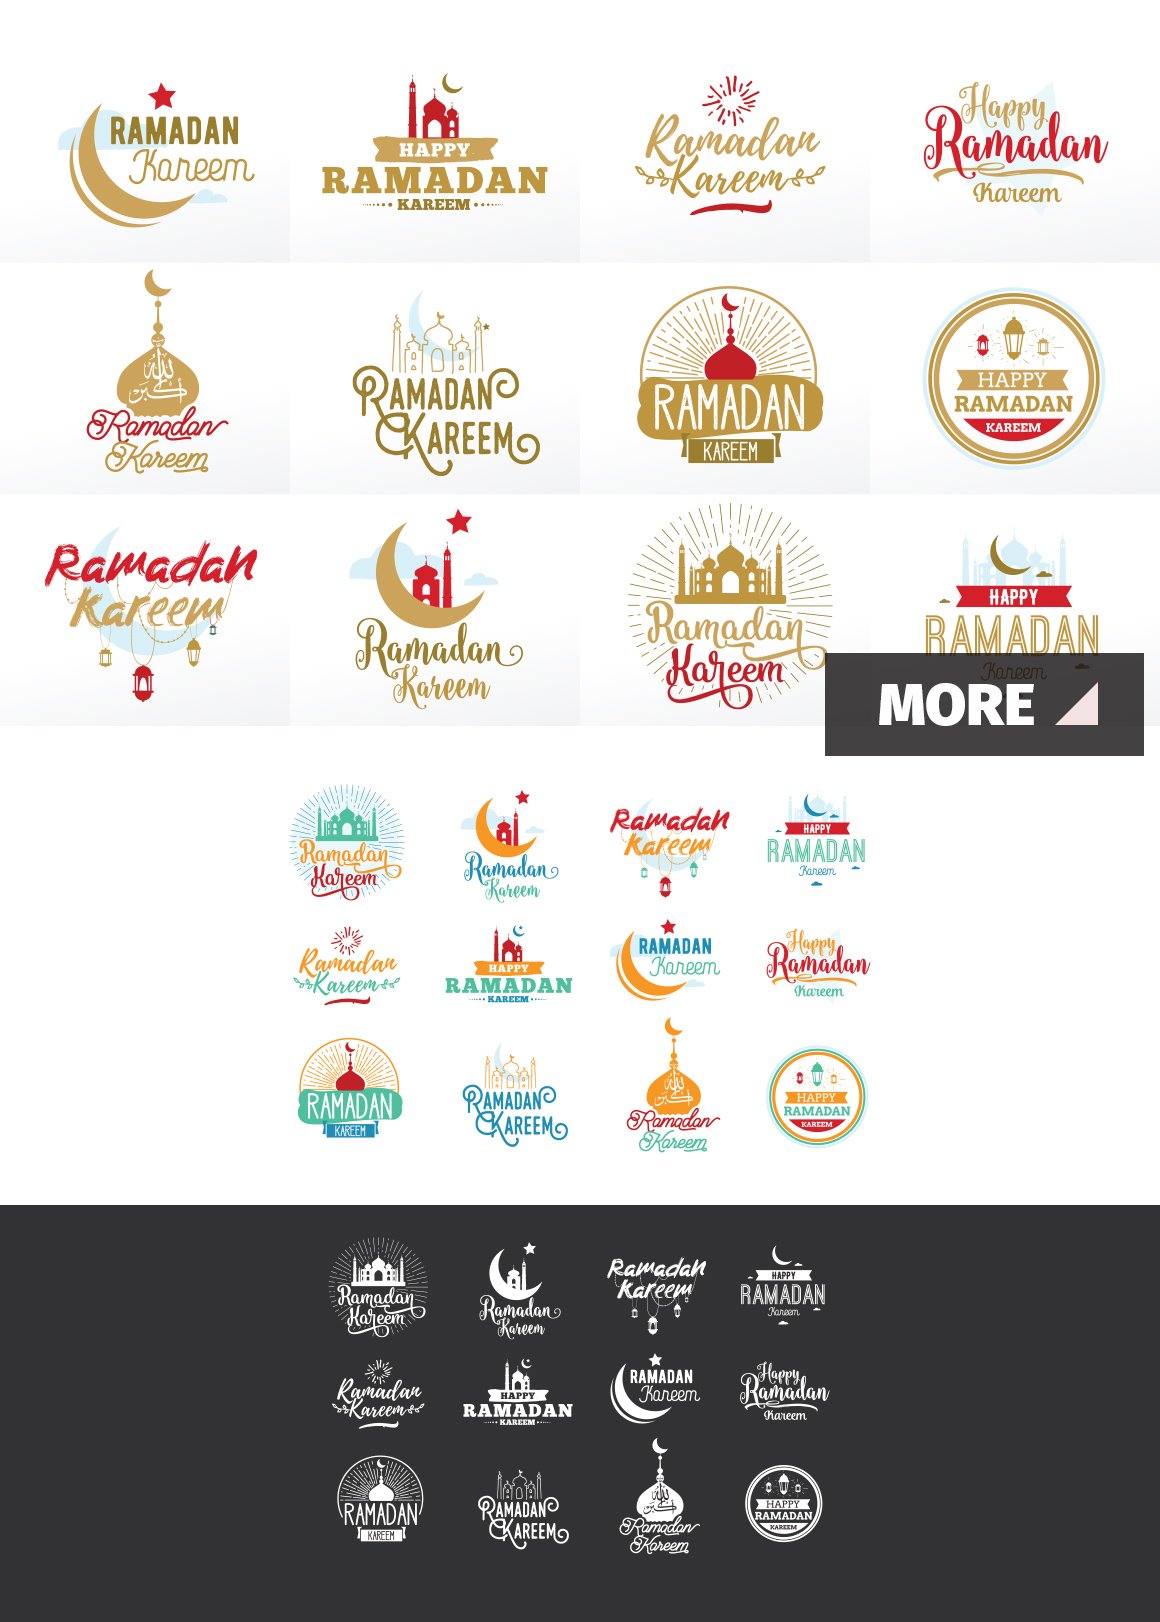 Great images with icons on the theme of Ramadan.